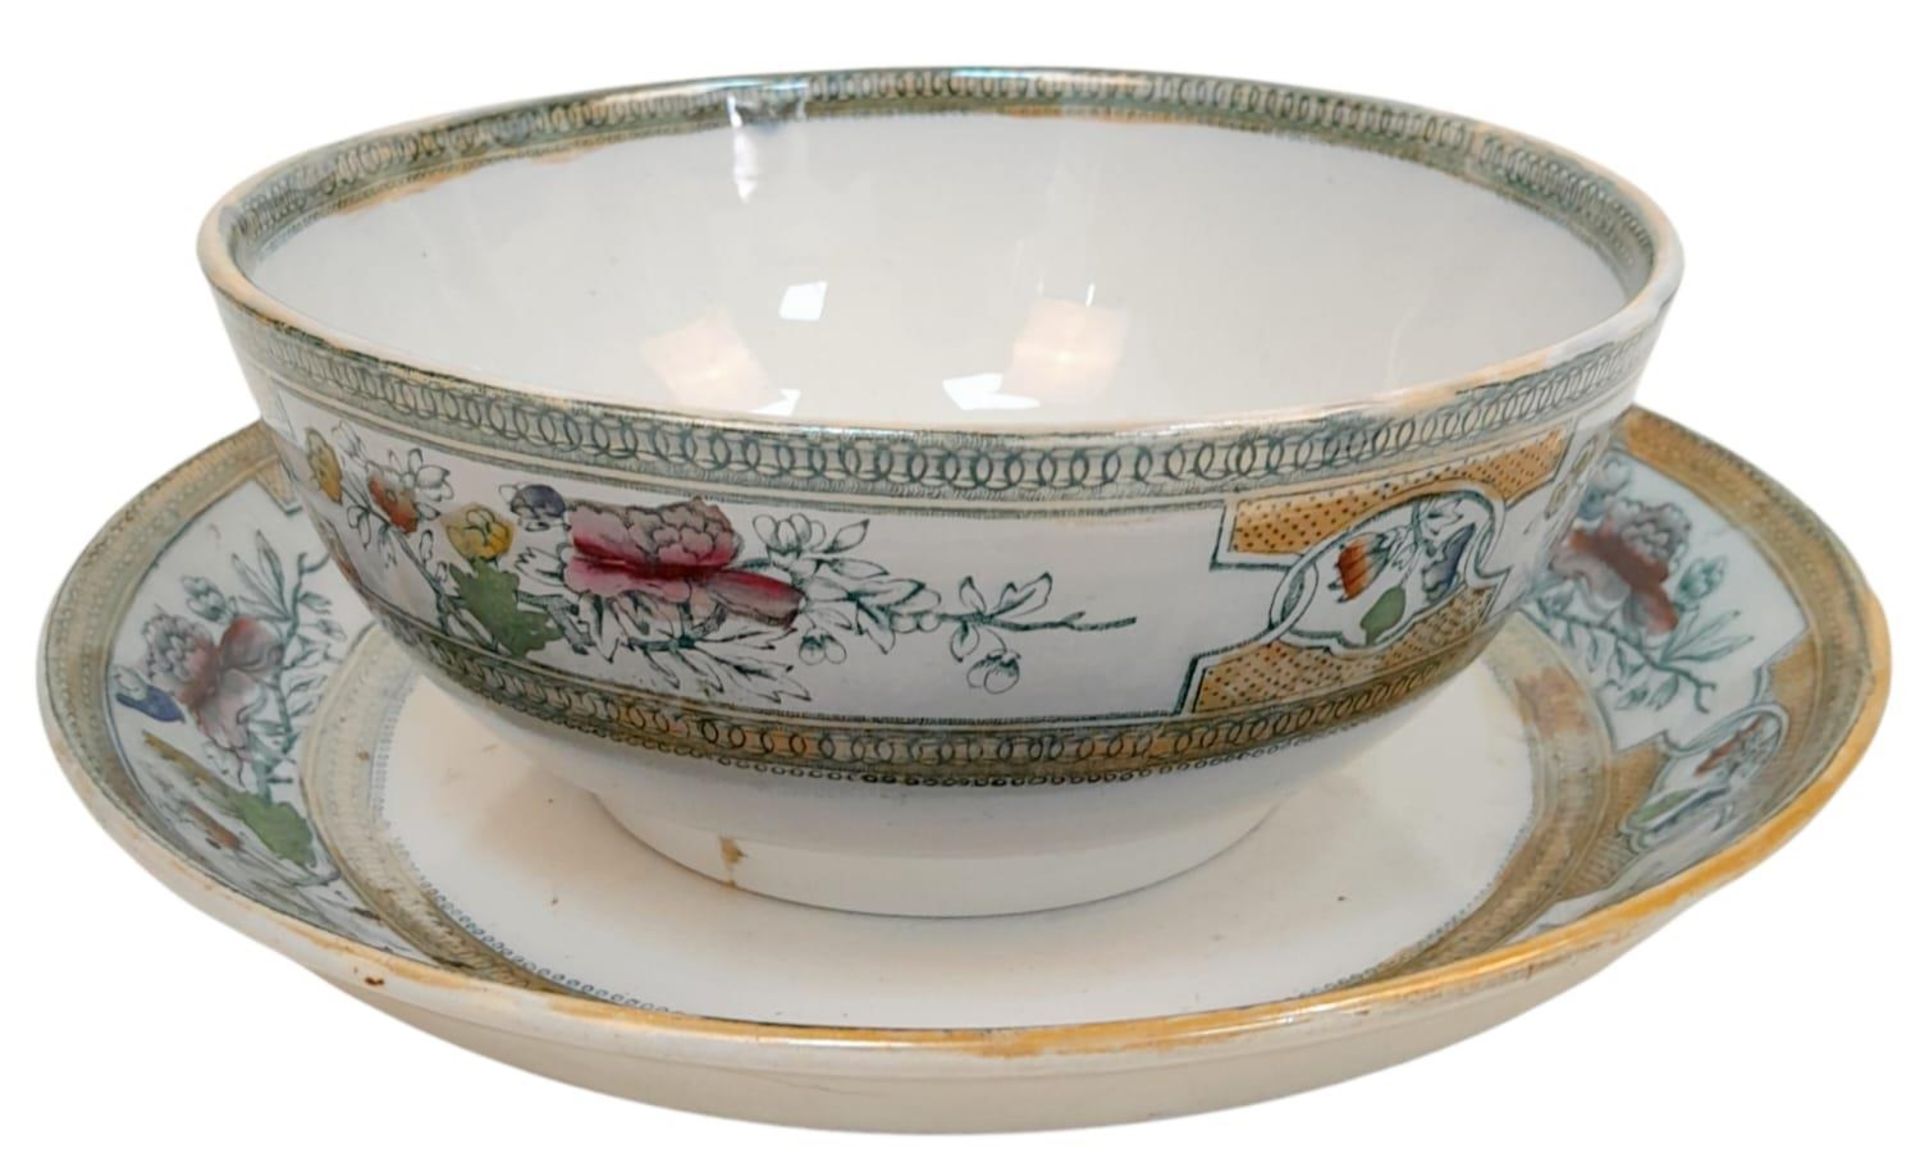 A LARGE BOWL AND PLATE MADE IN ENGLAND FOR THE KASHMIRI MARKET CIRCA 1920'S .